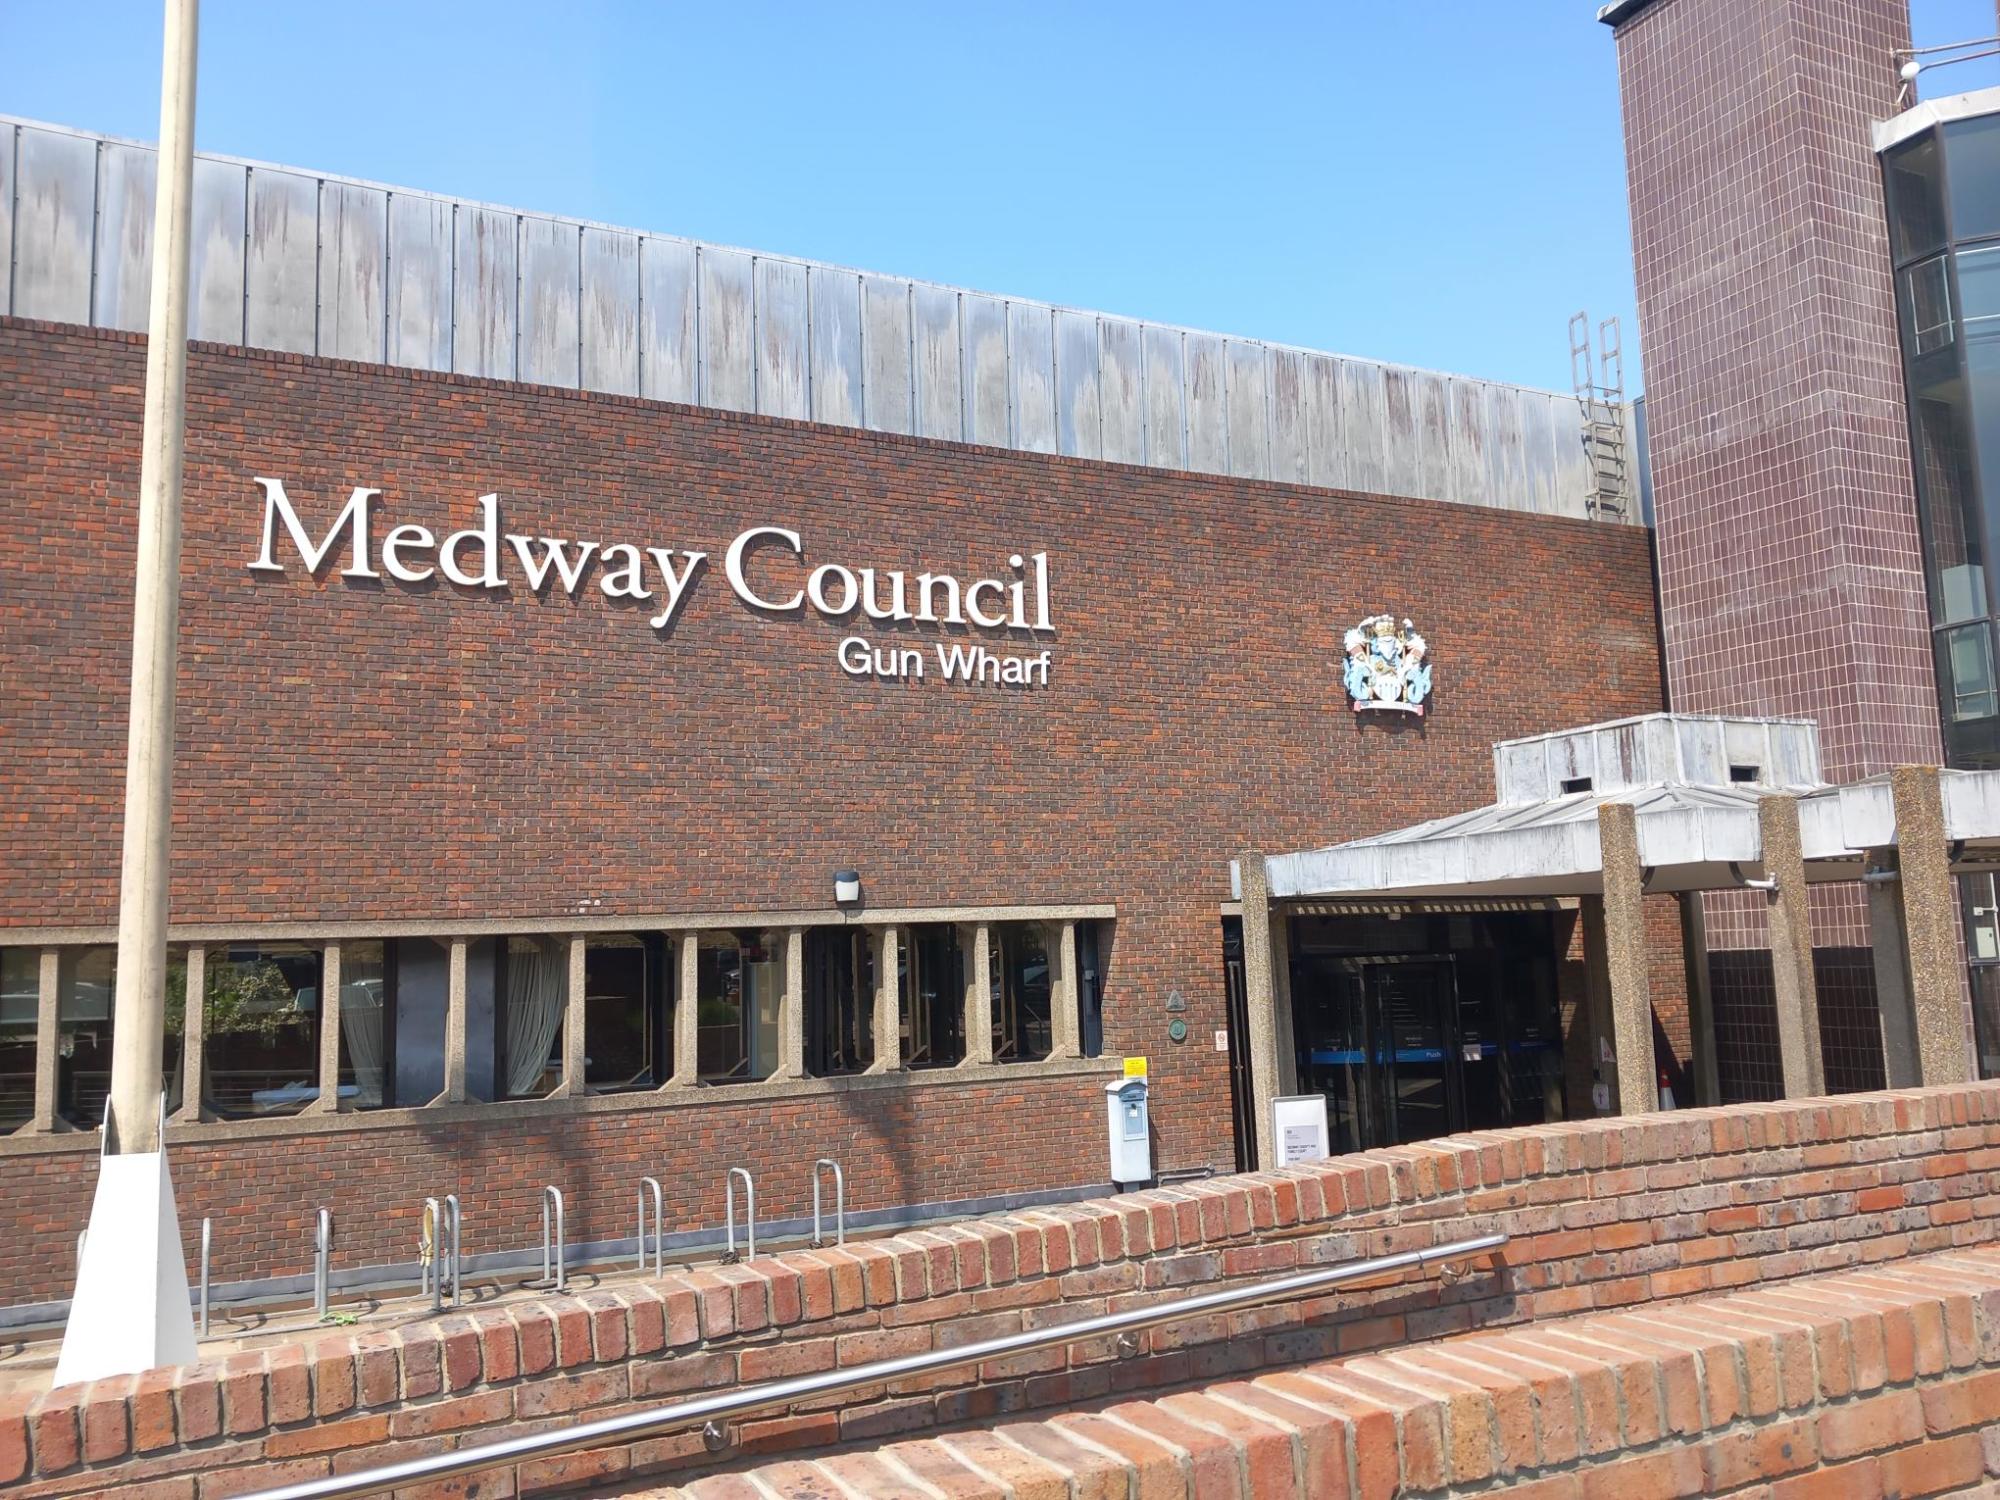 Medway Council Targets 20% Reduction in Emissions Across 11 Public Buildings